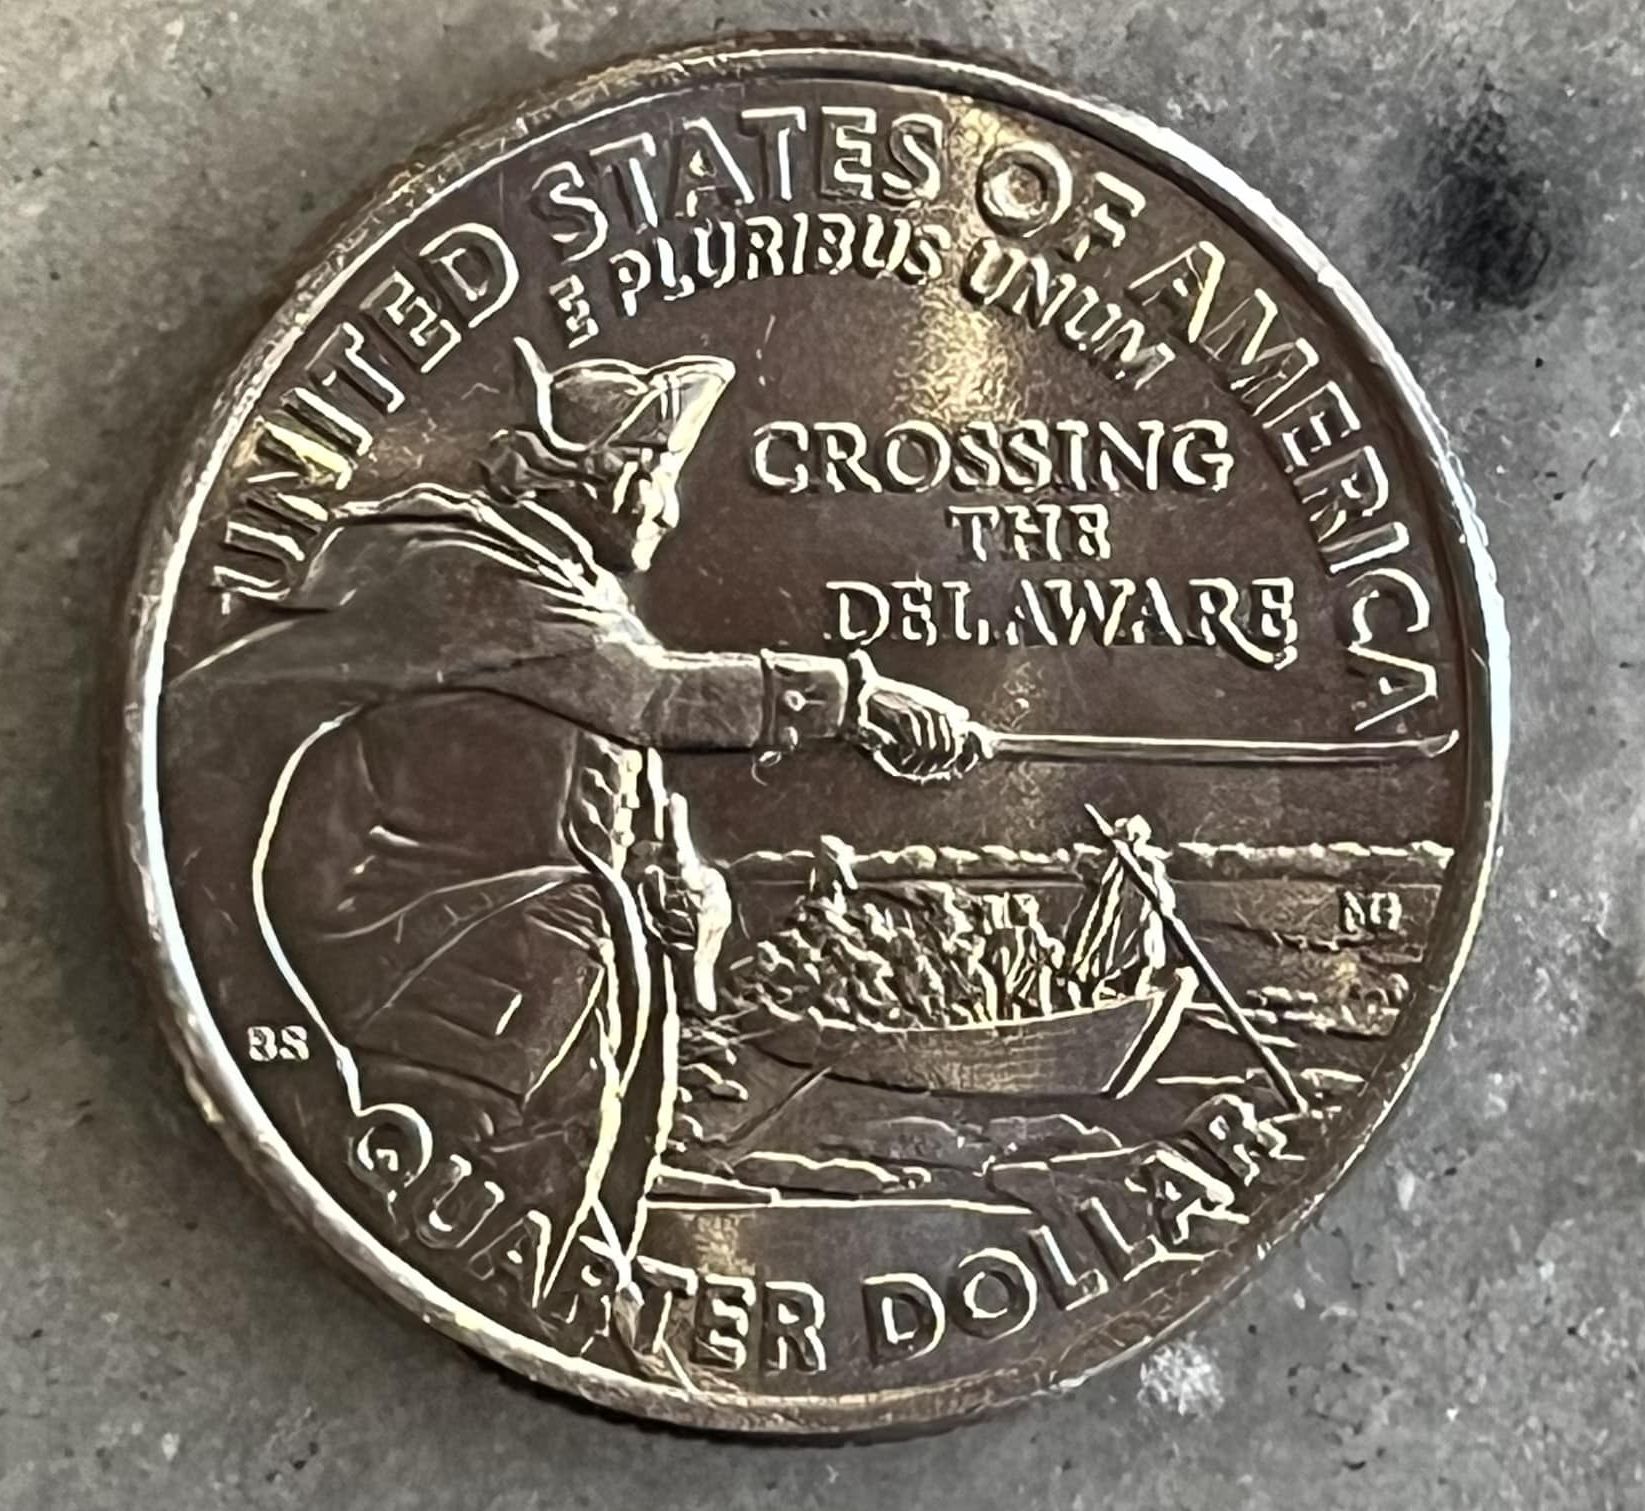 In 2021, the U.S. Mint began issuing quarters depicting Washington ferried by Glover's men.